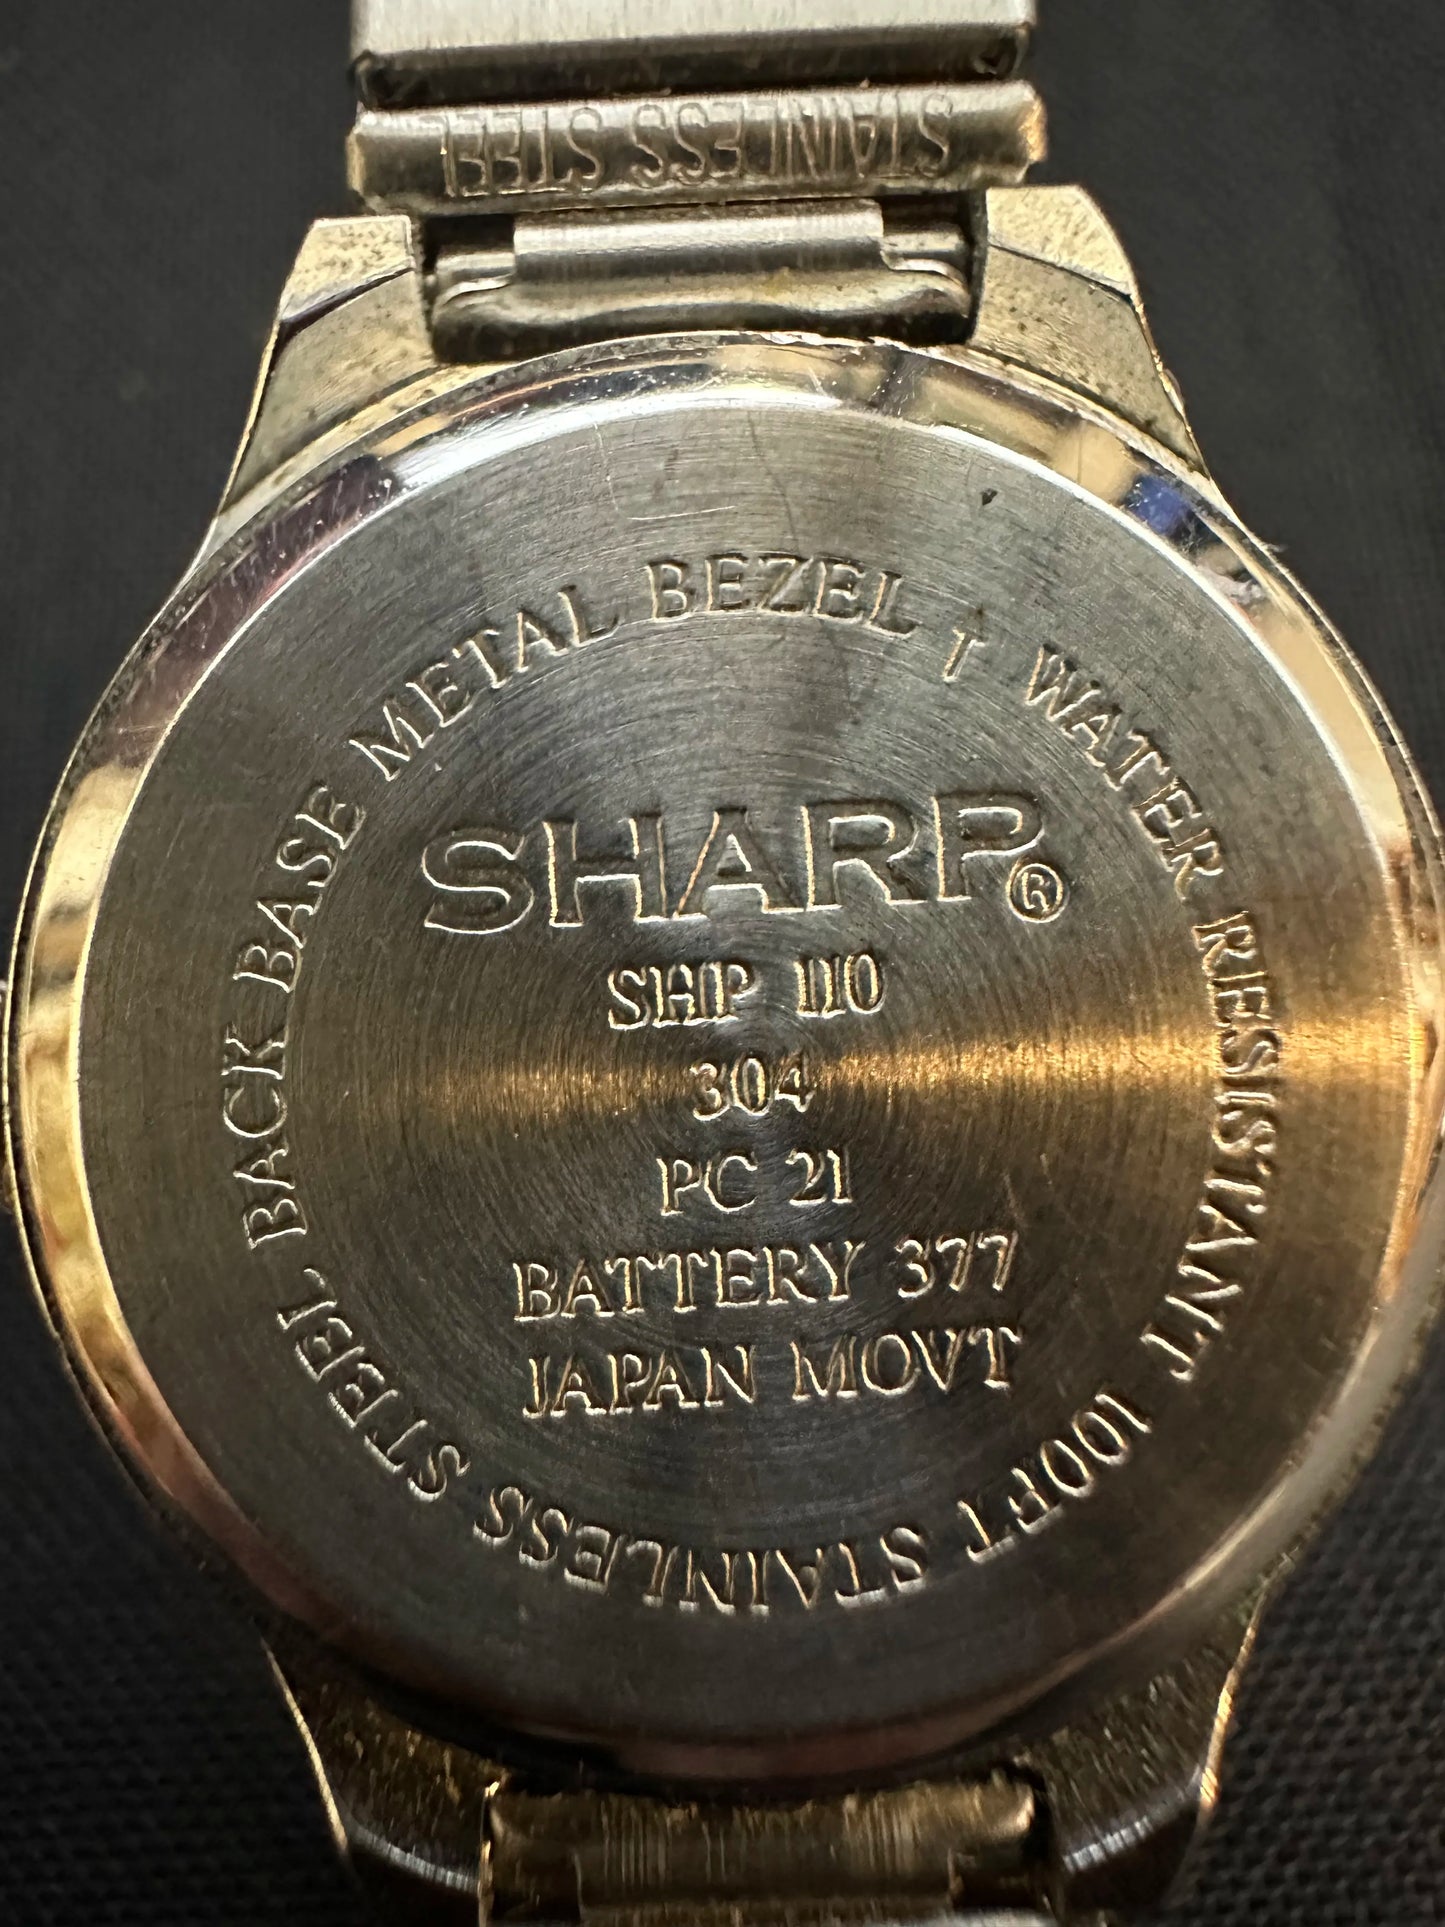 Sharp Silver Watch - Stretch Band - Stainless Steel - SHP110